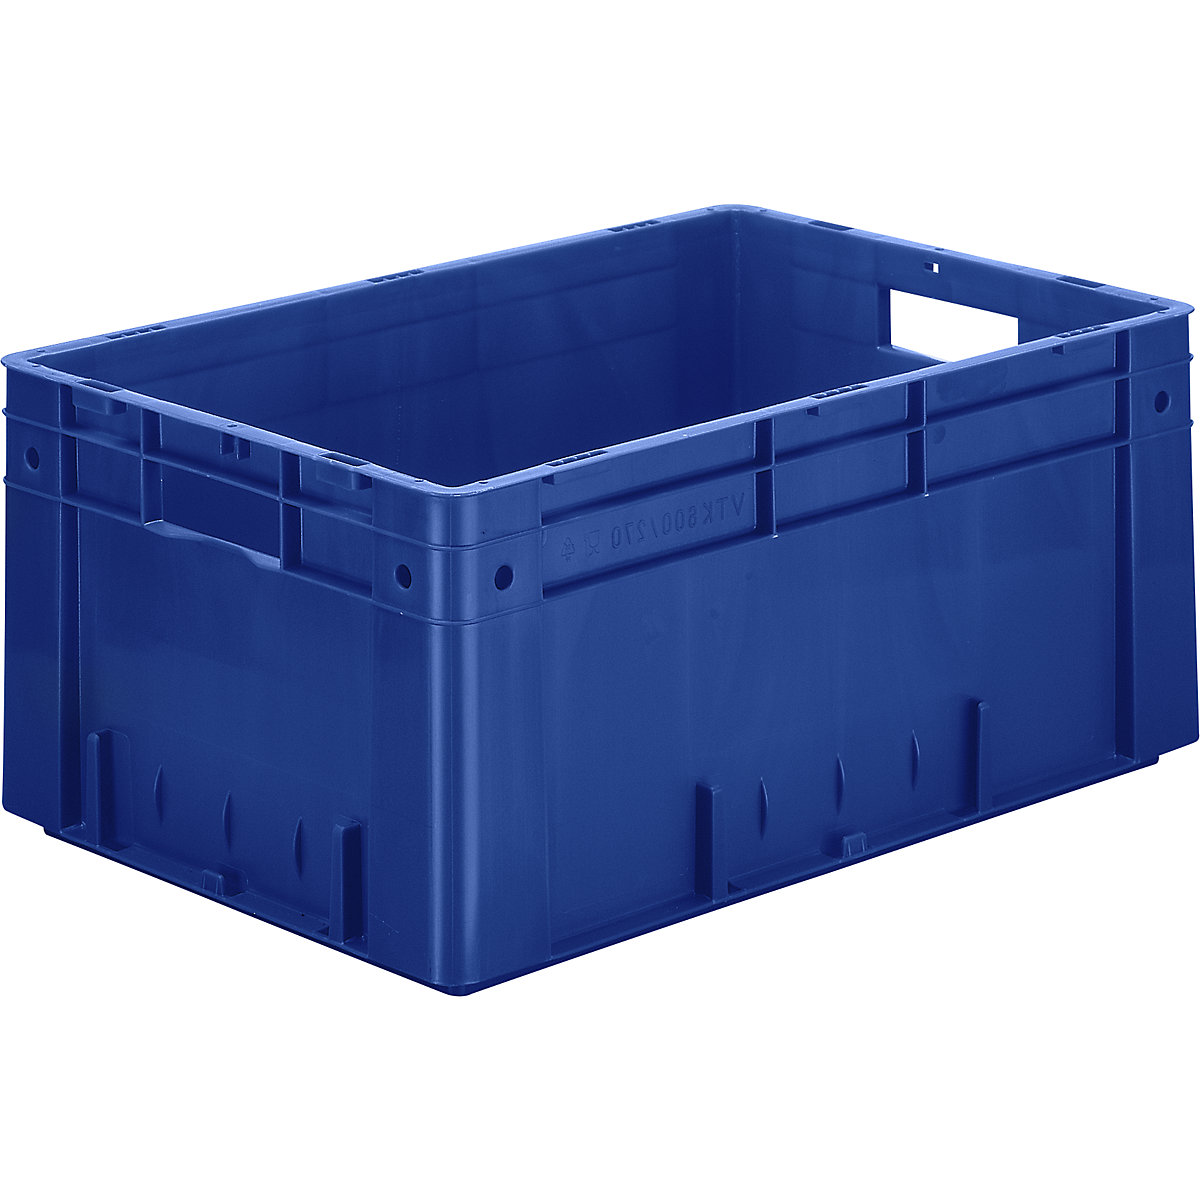 Heavy duty Euro container, polypropylene, capacity 50 l, LxWxH 600 x 400 x 270 mm, solid walls, solid base, blue, pack of 2-4